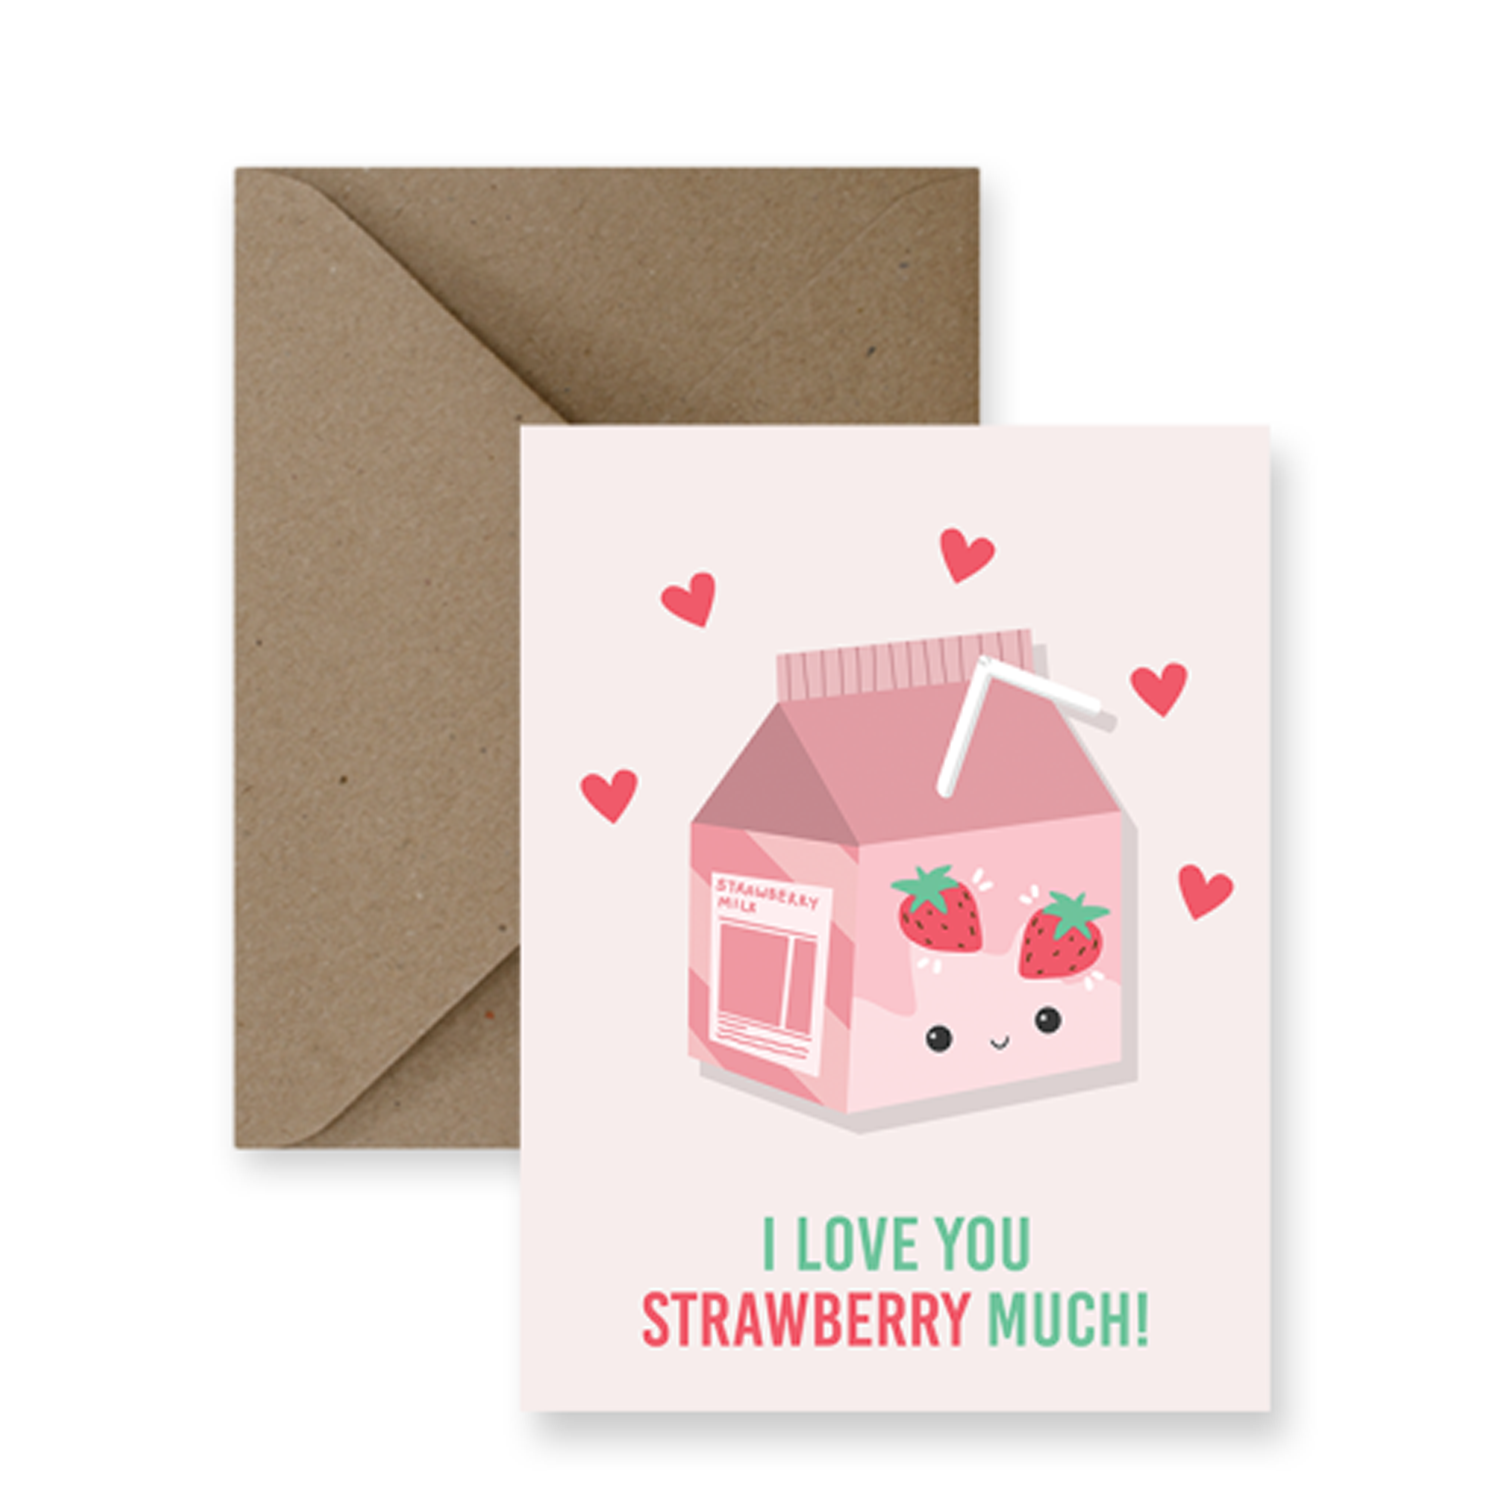 IMPAPER: Love You Strwb Much Product Image 1 of 4